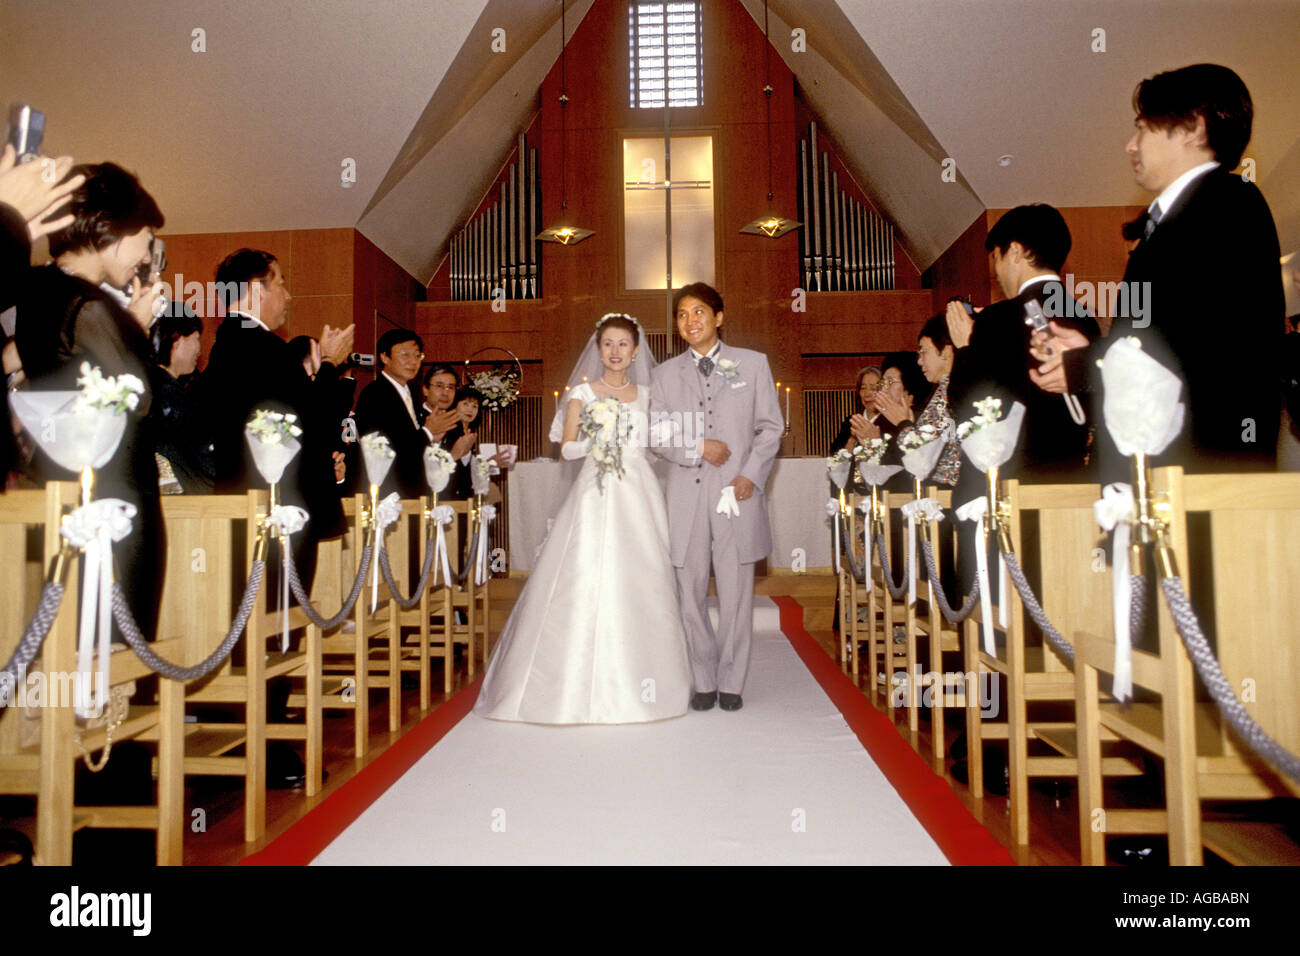 A Japanese wedding couple in Catholic church within a Hotel wearing